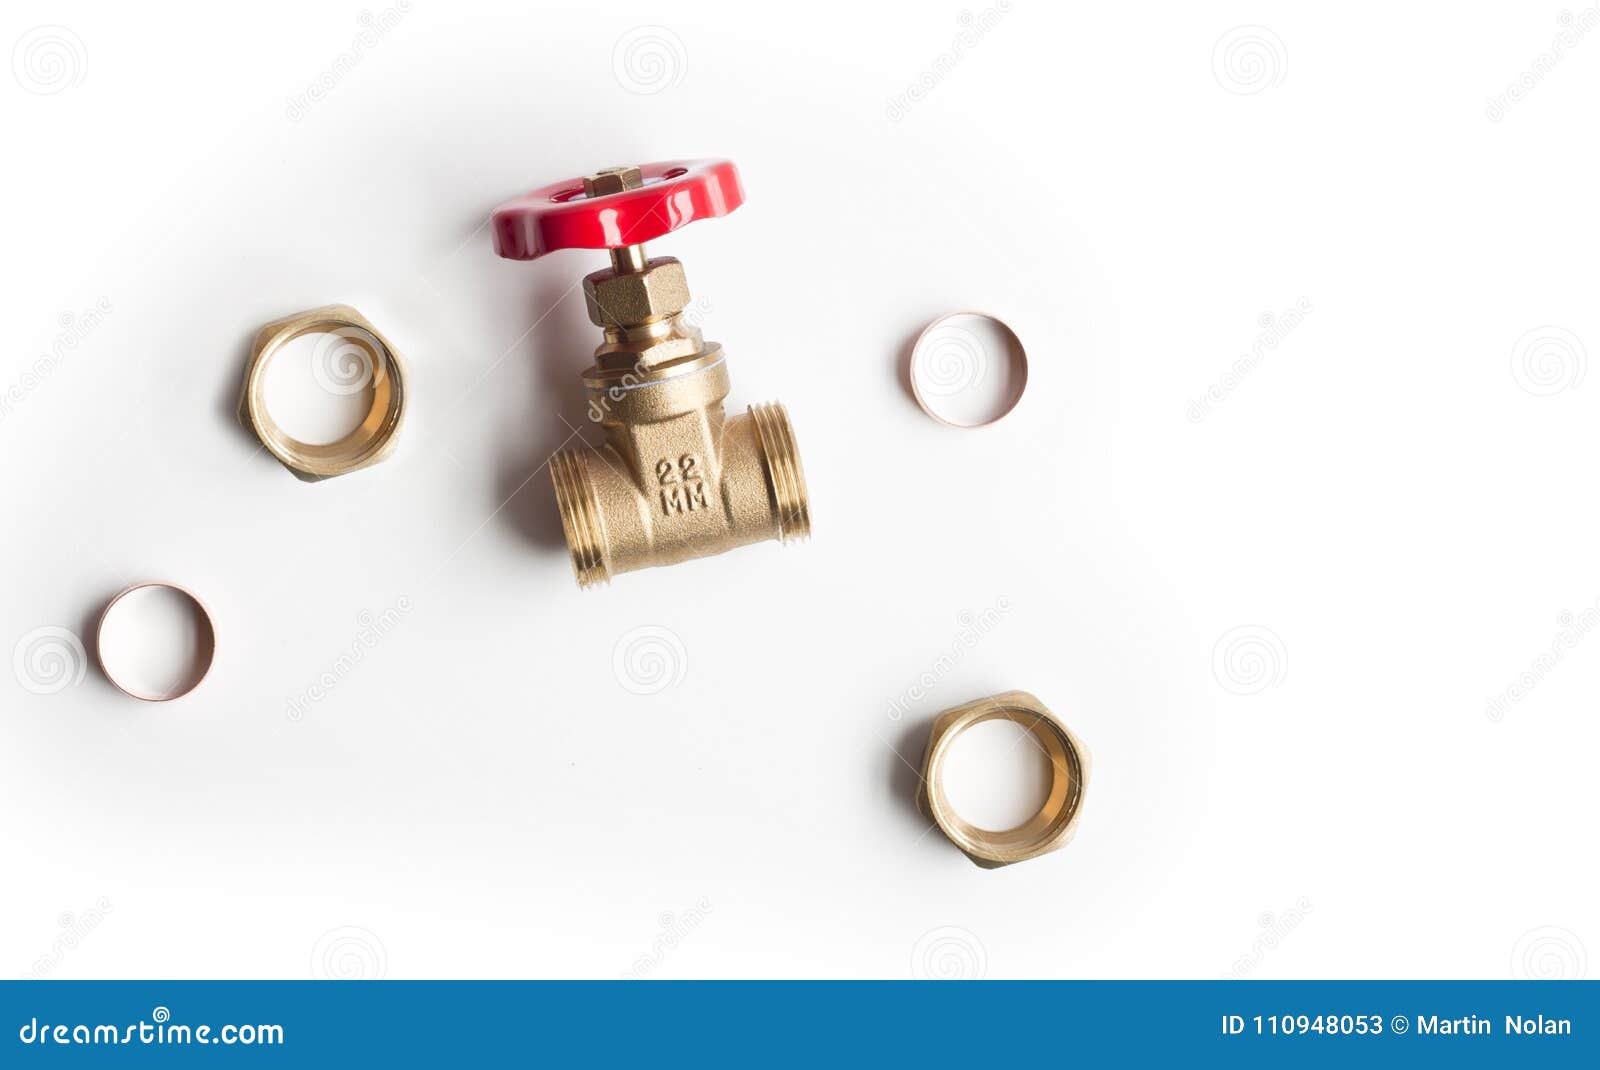 Plumbing Gate Valve and Olives Stock Image - Image of blueprint